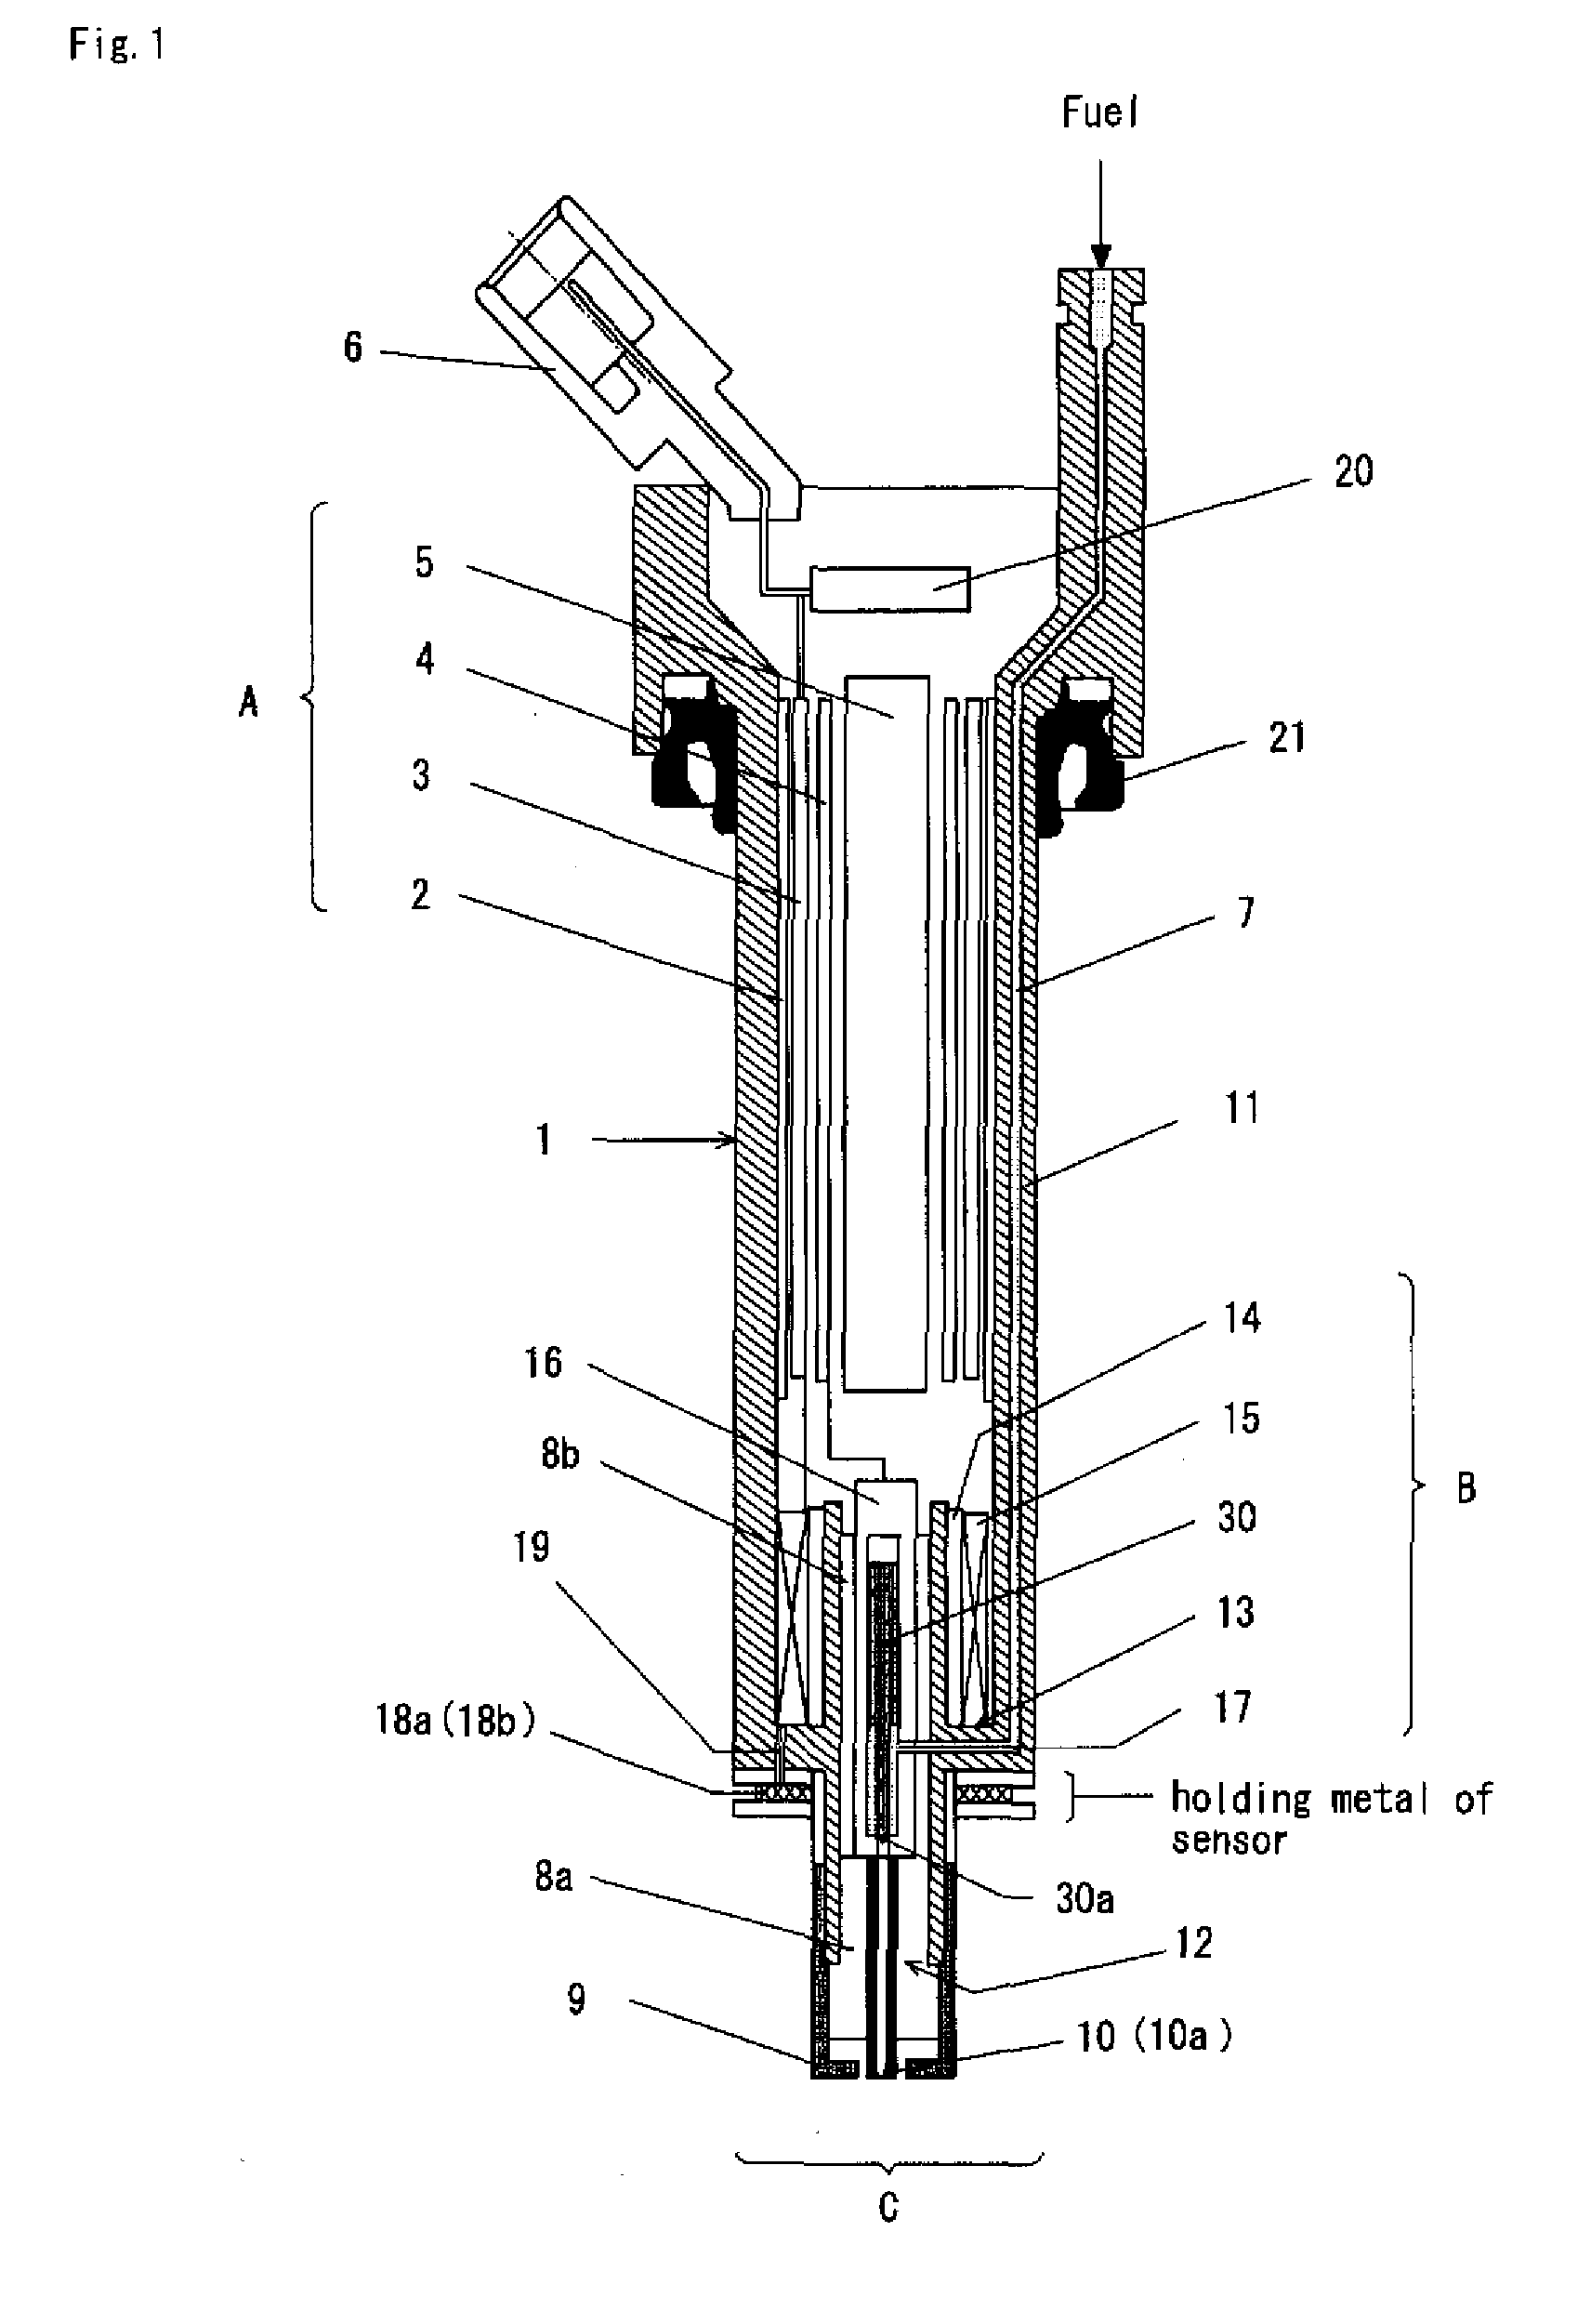 Multifunction ignition device integrated with spark plug